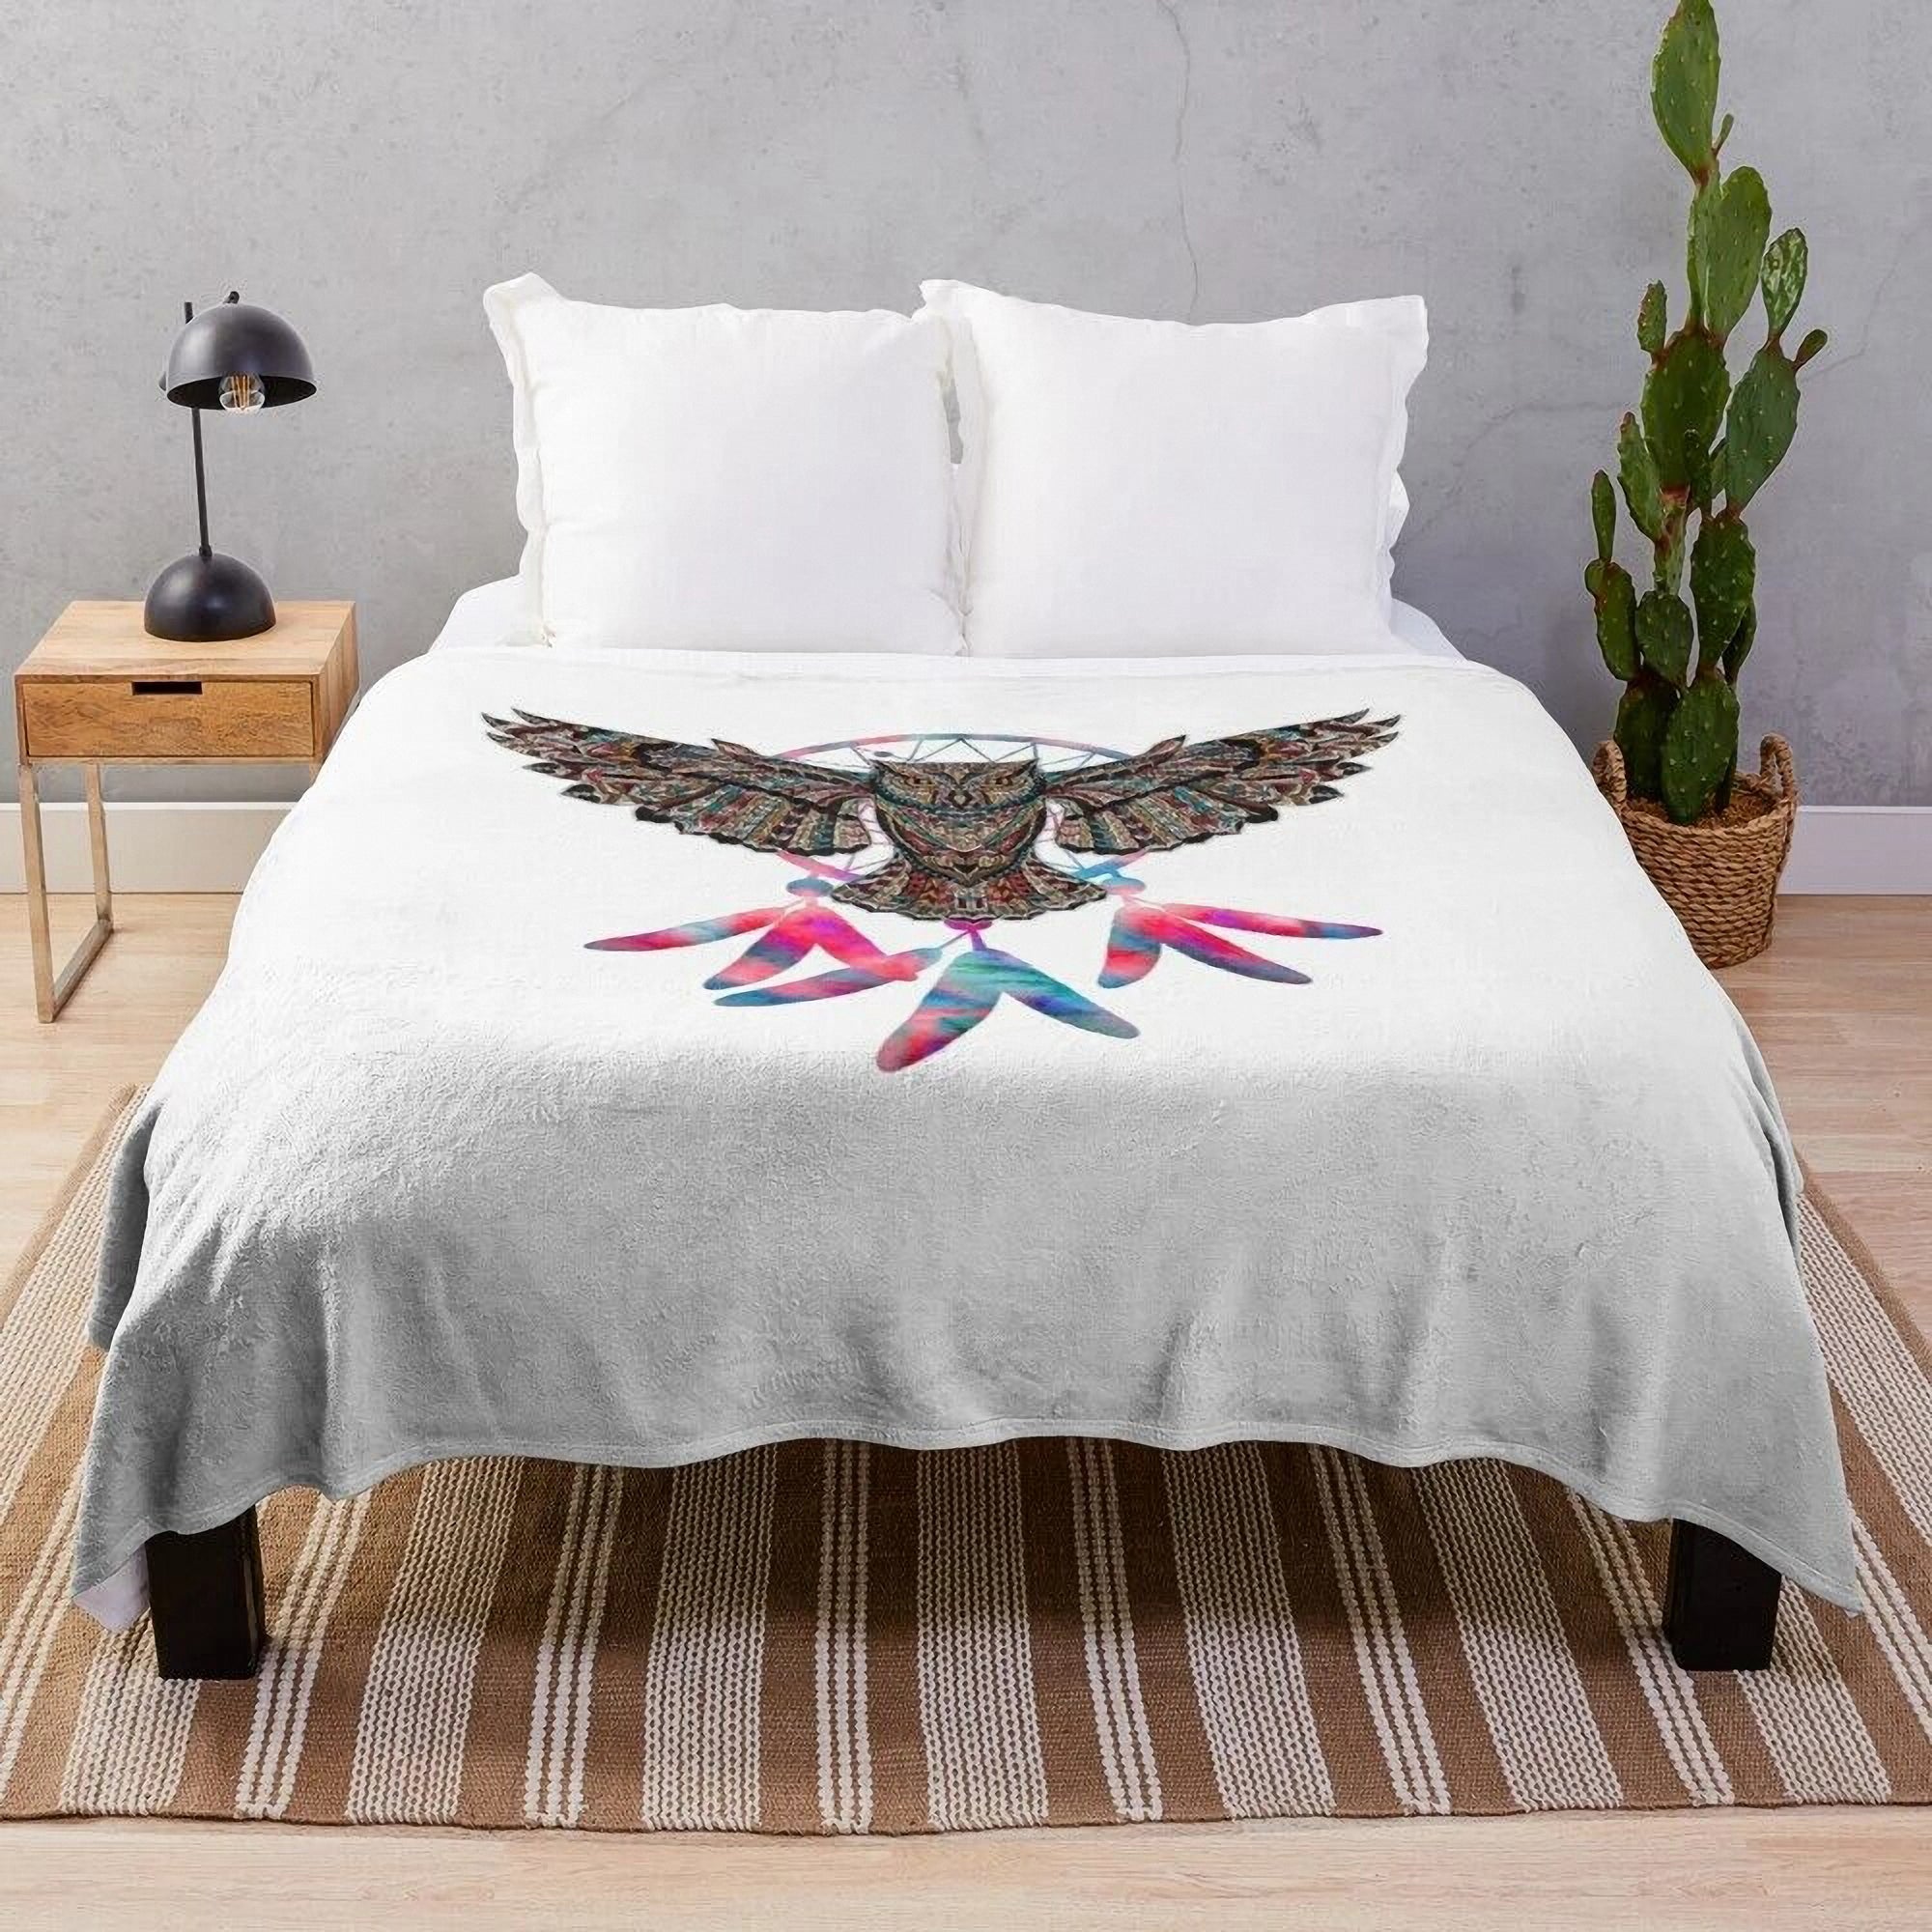 Native American Indian Dreamcatcher Owl Feathers Tribal Blanket